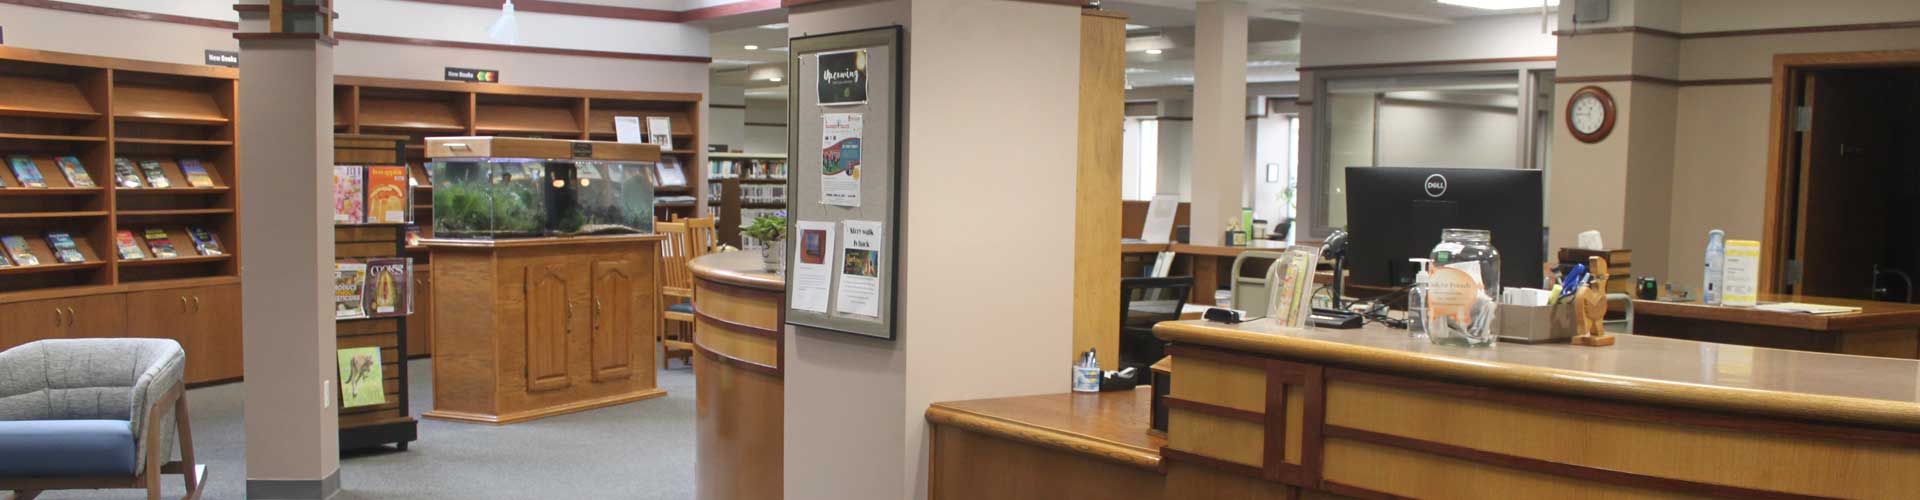 Front Entrance and Circulation Desk for Fontana Public Library